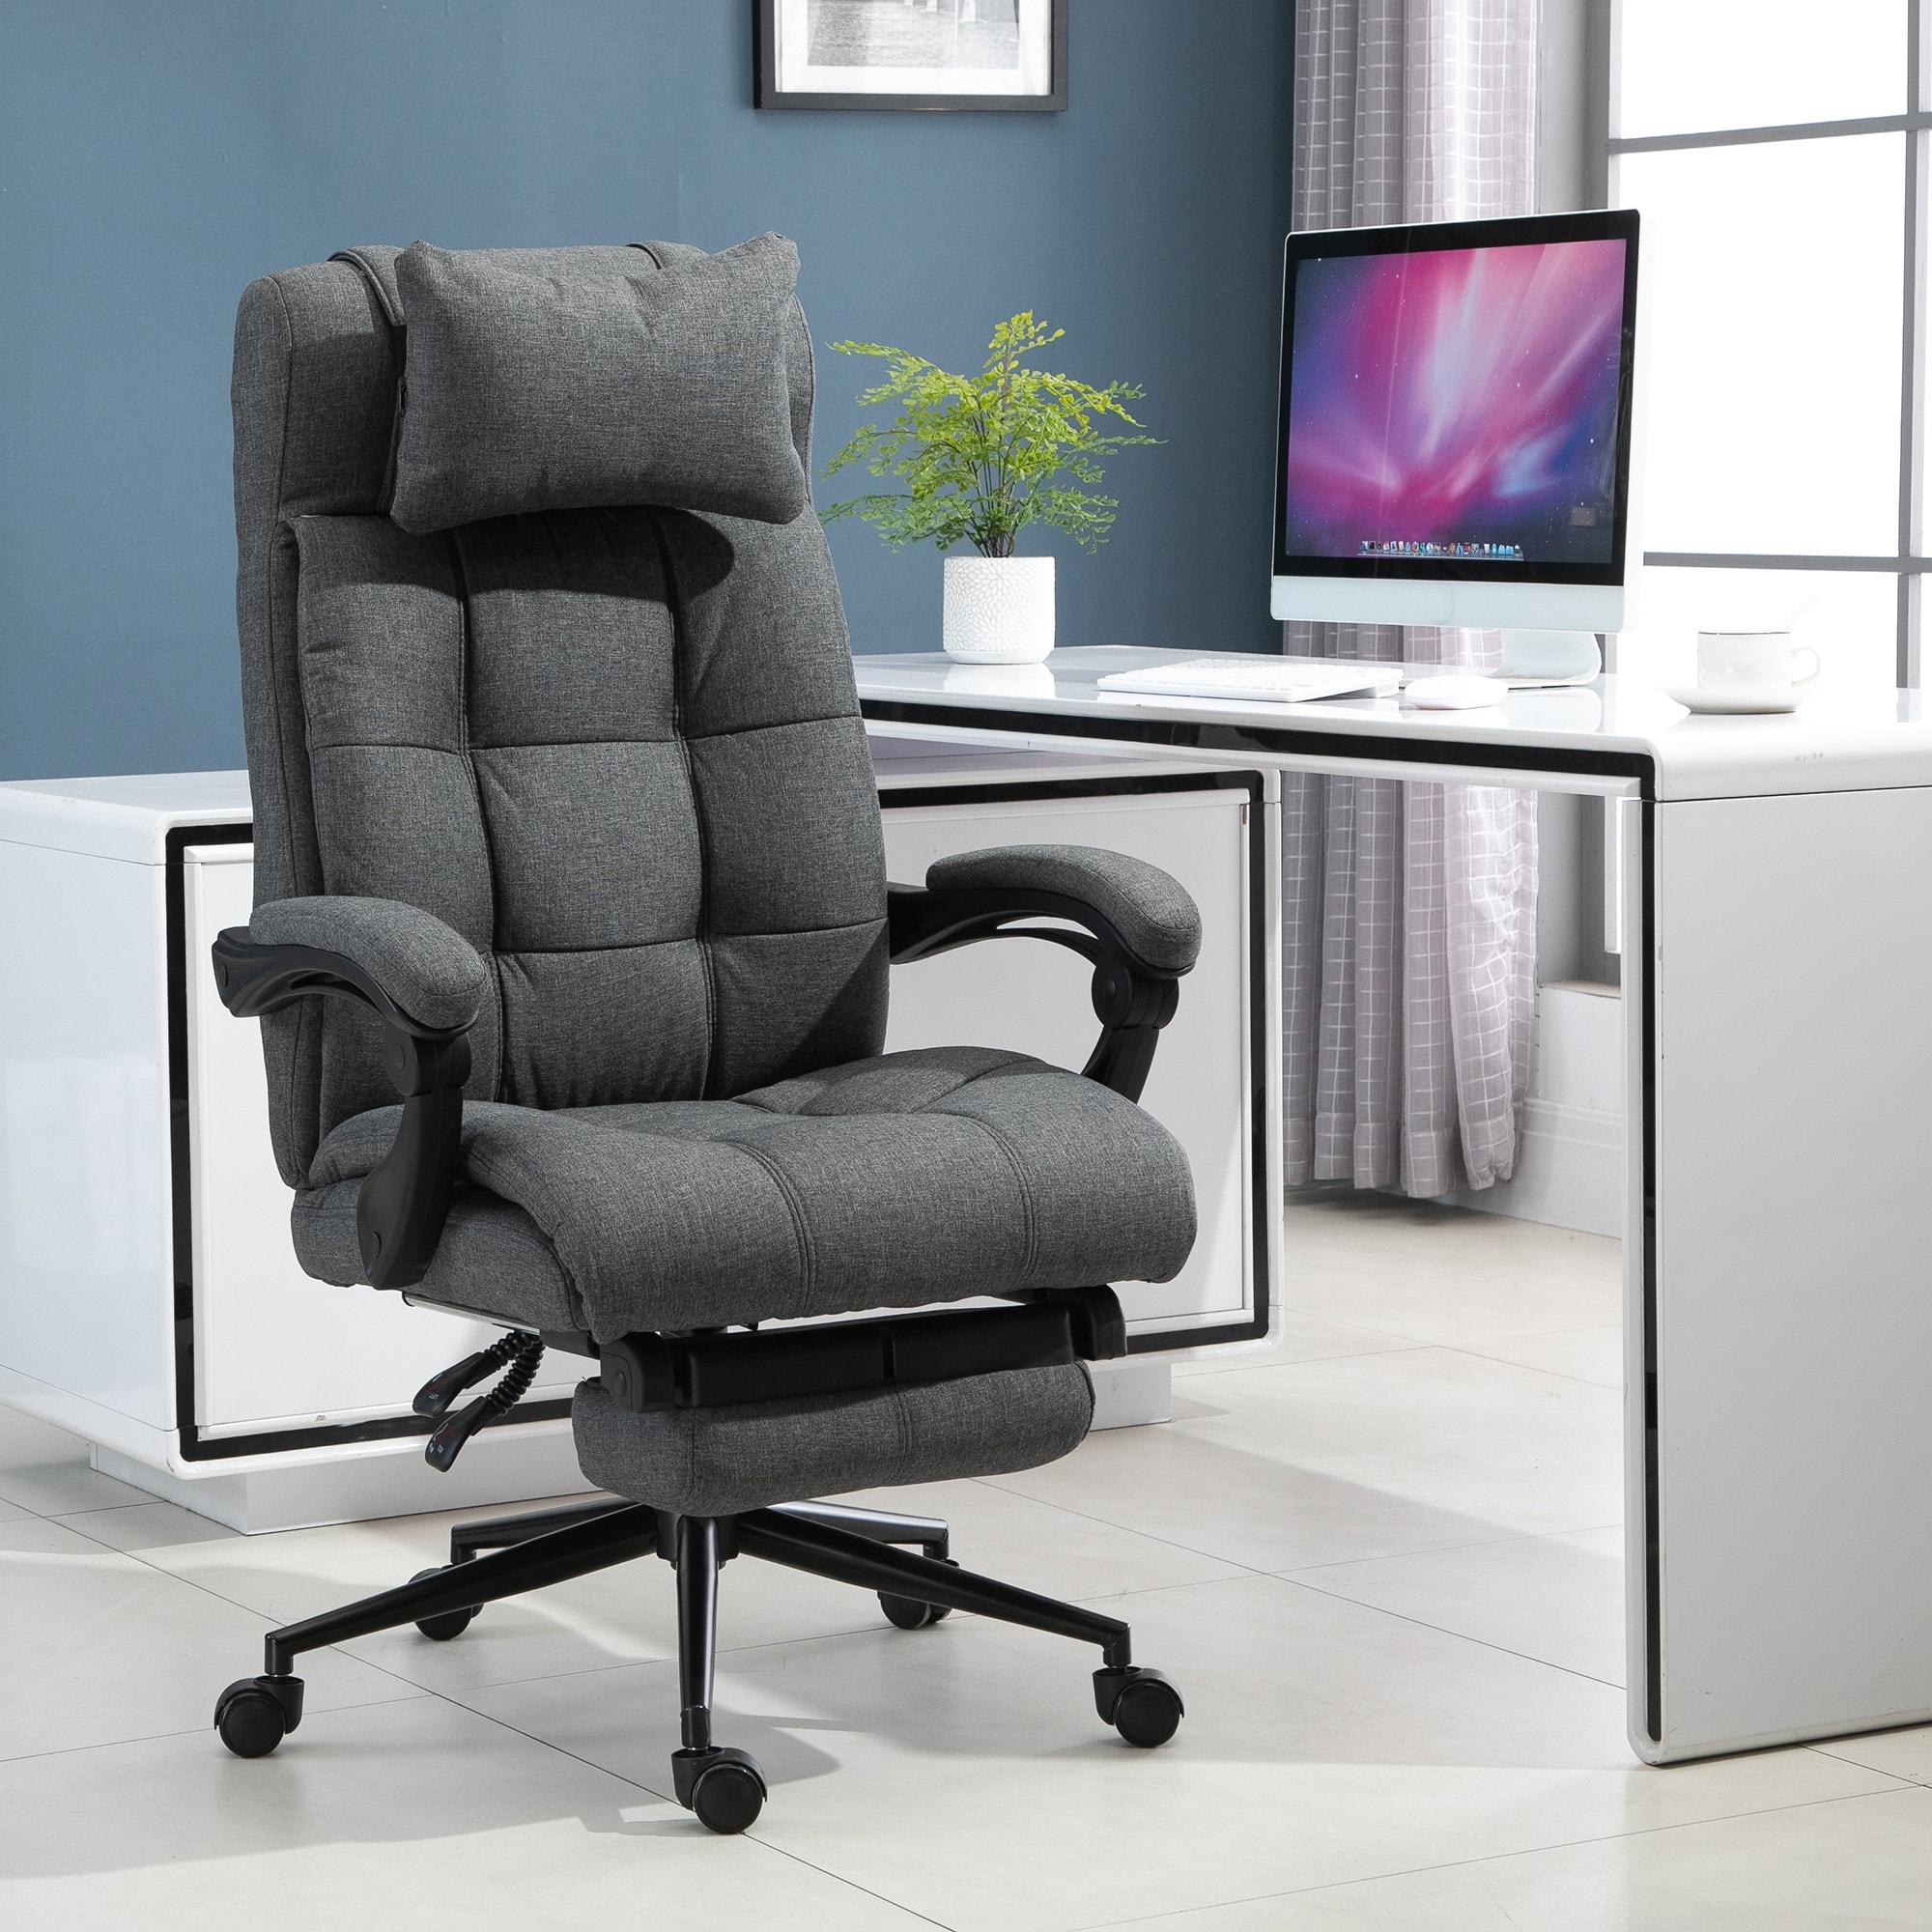 https://ak1.ostkcdn.com/images/products/is/images/direct/d27d7e9ab941d0fce8ea69c87f7d00b4a86edd52/Vinsetto-Executive-Linen-Fabric-Home-Office-Chair-with-Retractable-Footrest%2C-Headrest%2C-and-Lumbar-Support.jpg